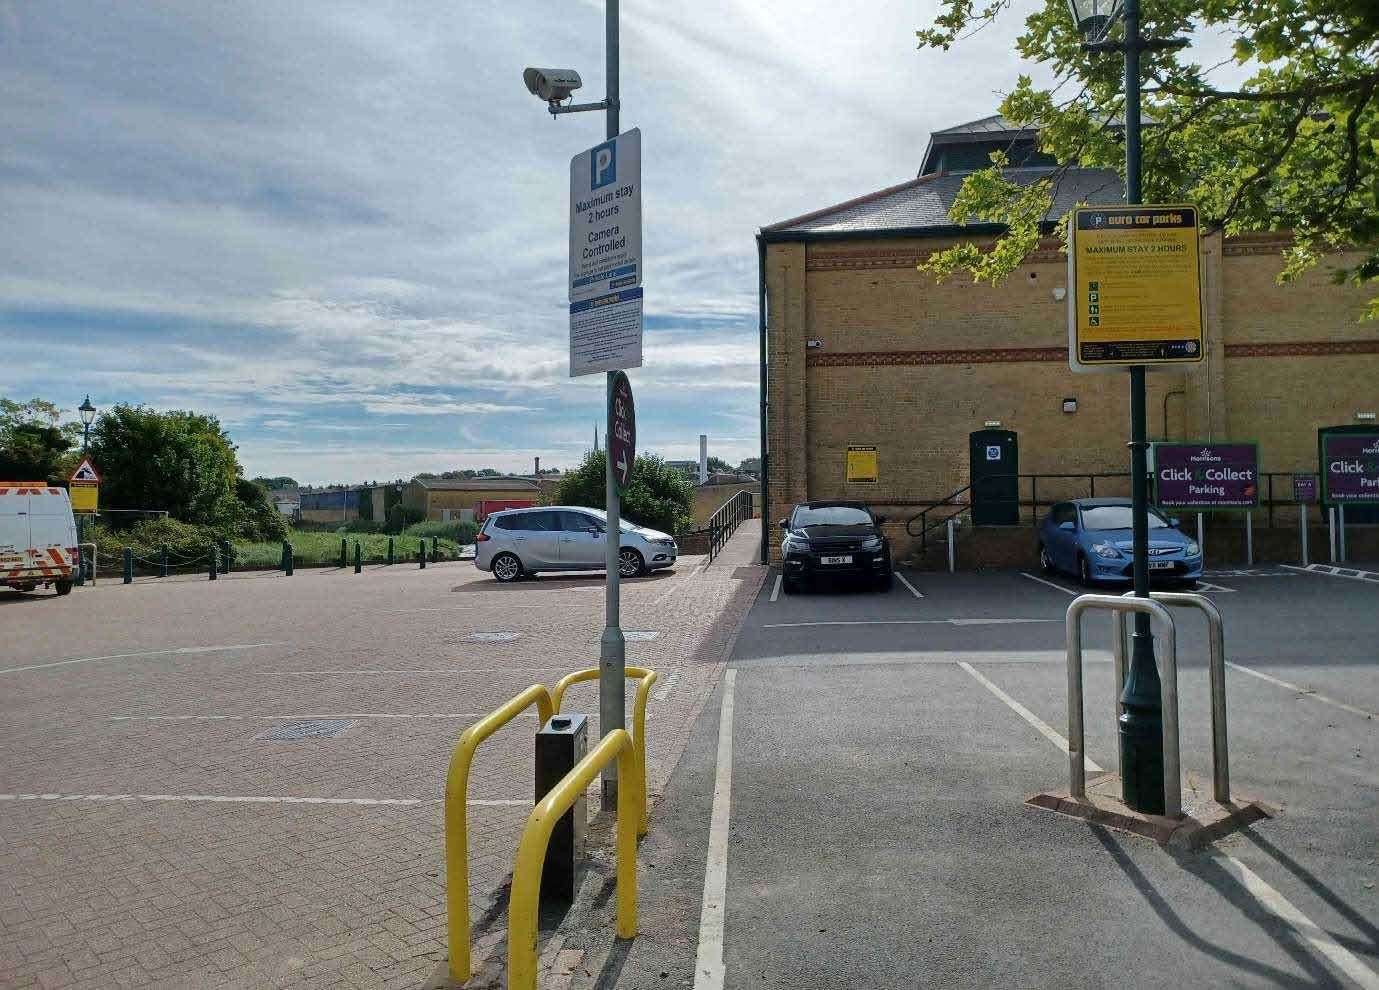 Faversham's branch of Morrisons has installed an ANPR system without seeking planning permission